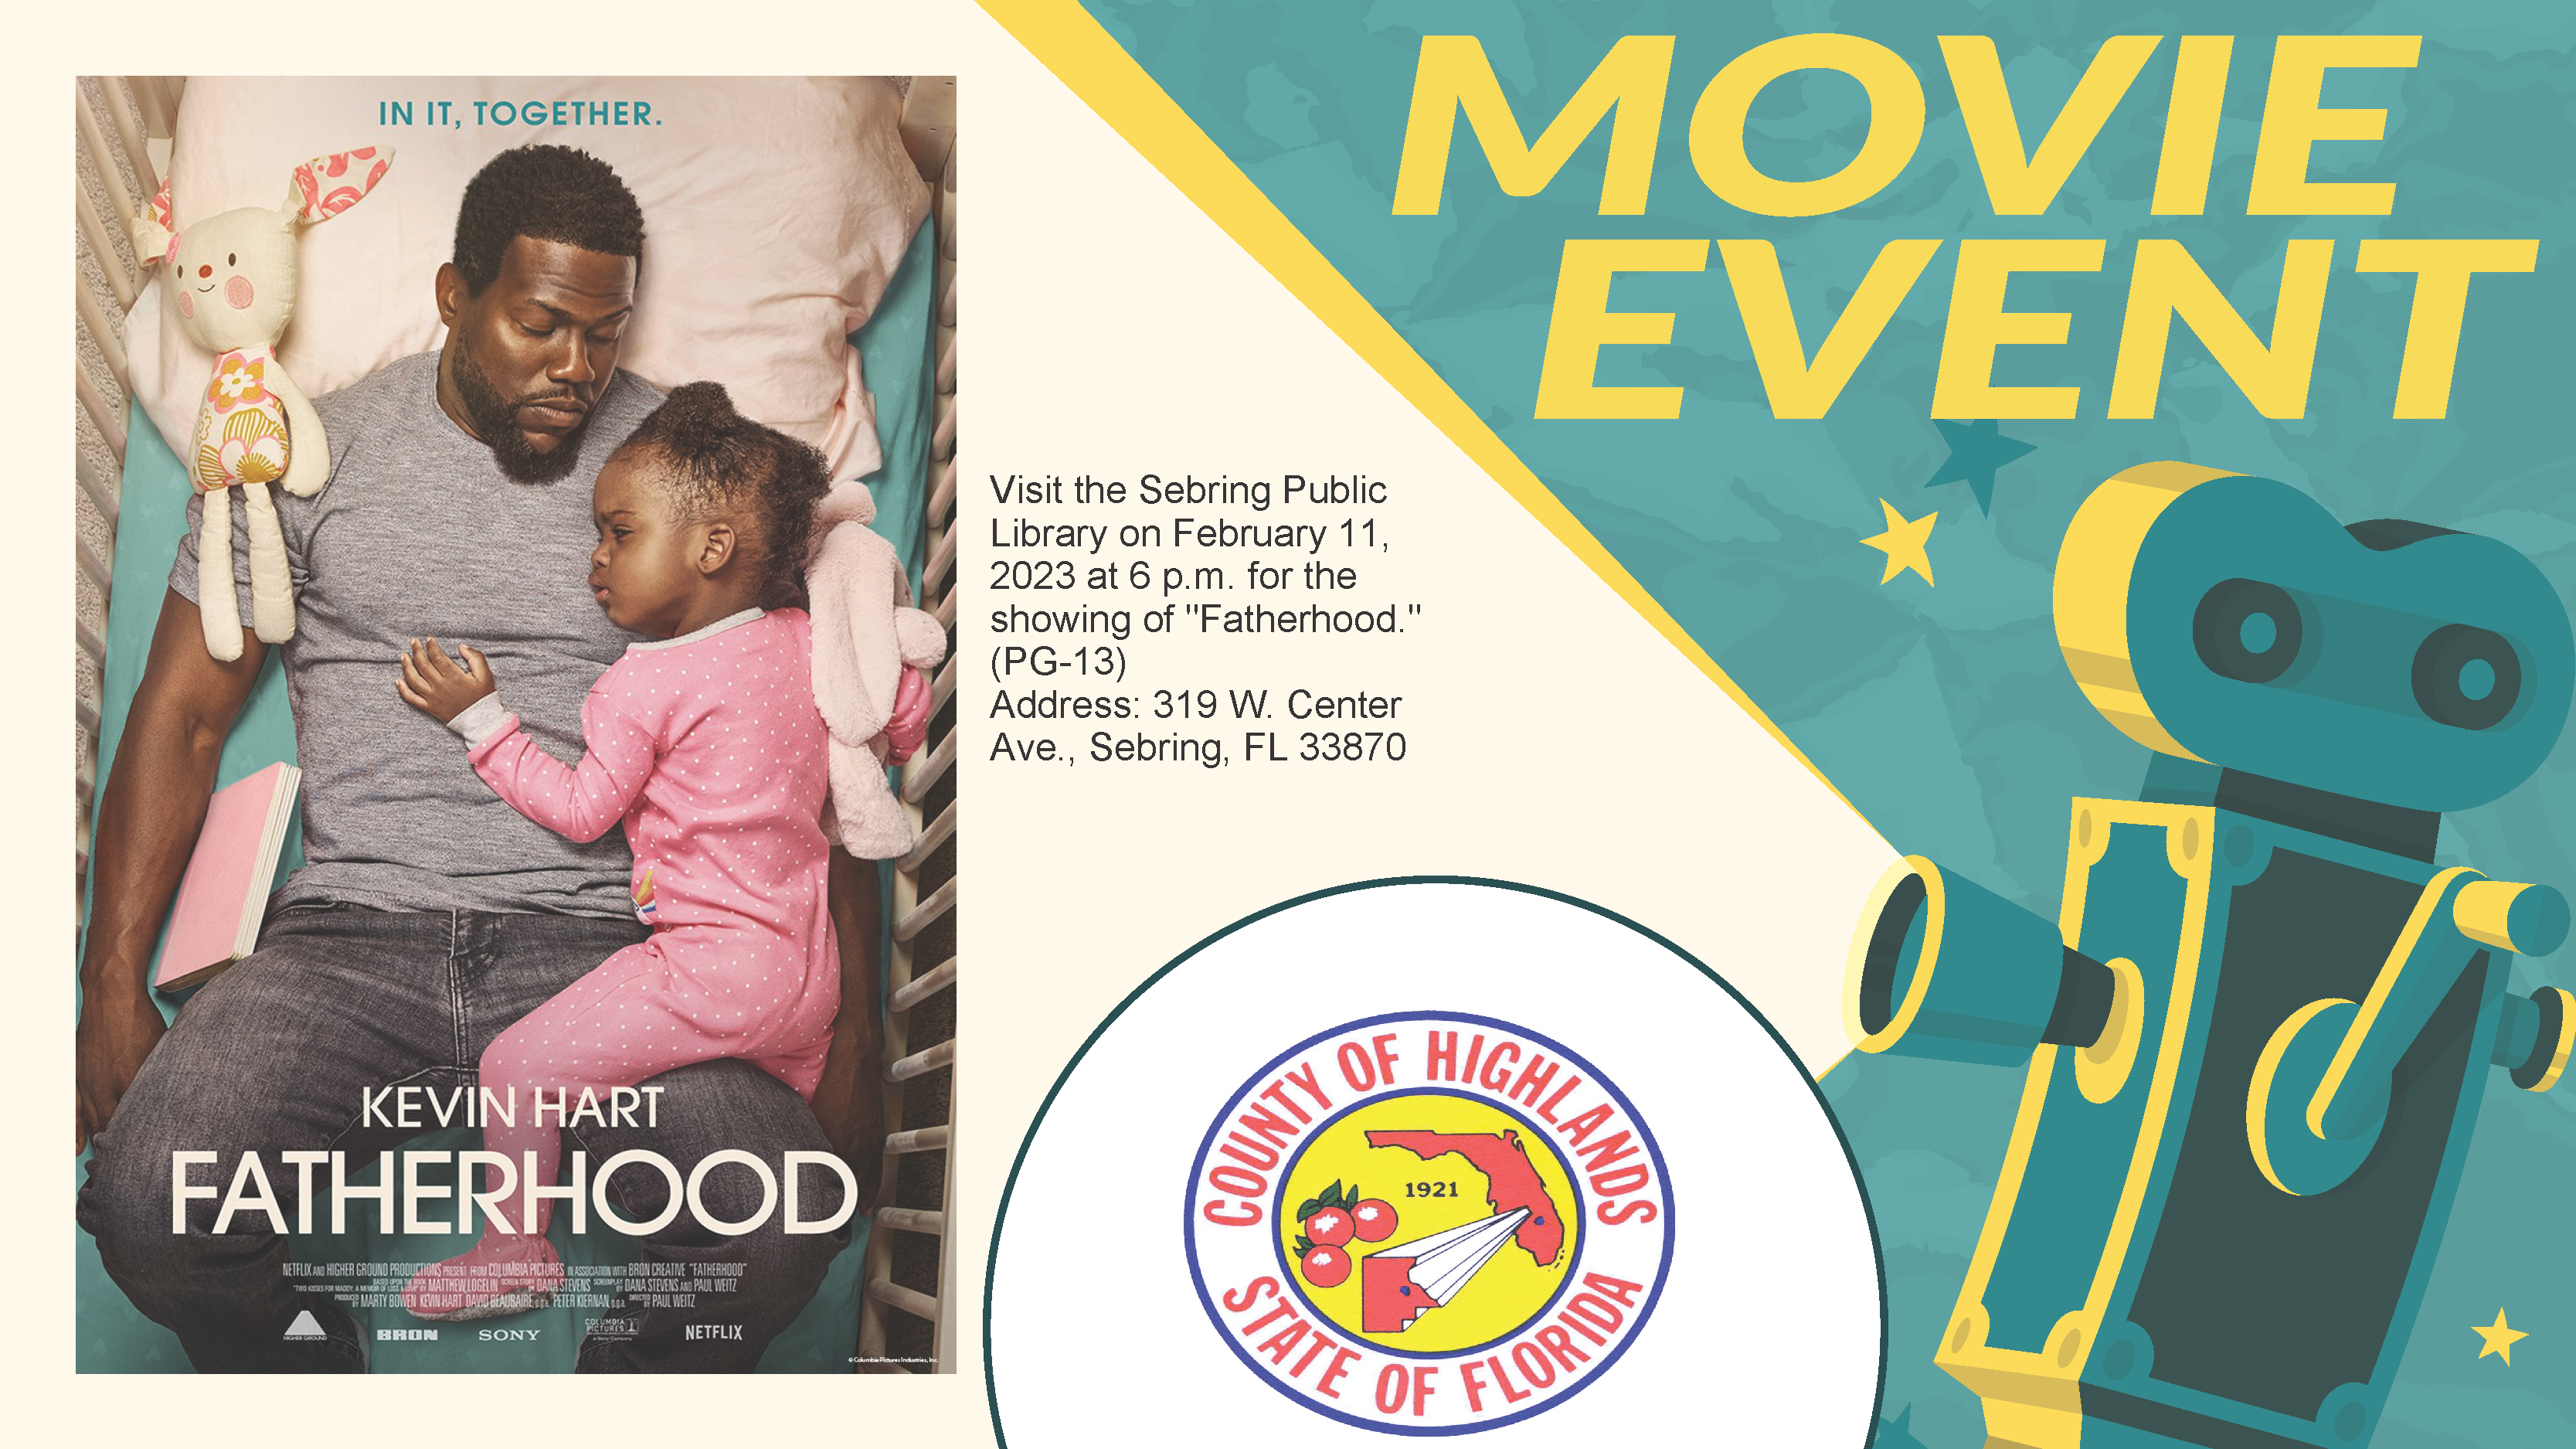 Visit the Sebring Public Library on February 11, 2023 at 6 p.m. for the showing of "Fatherhood." (PG-13) Address: 319 W. Center Ave., Sebring, FL 33870